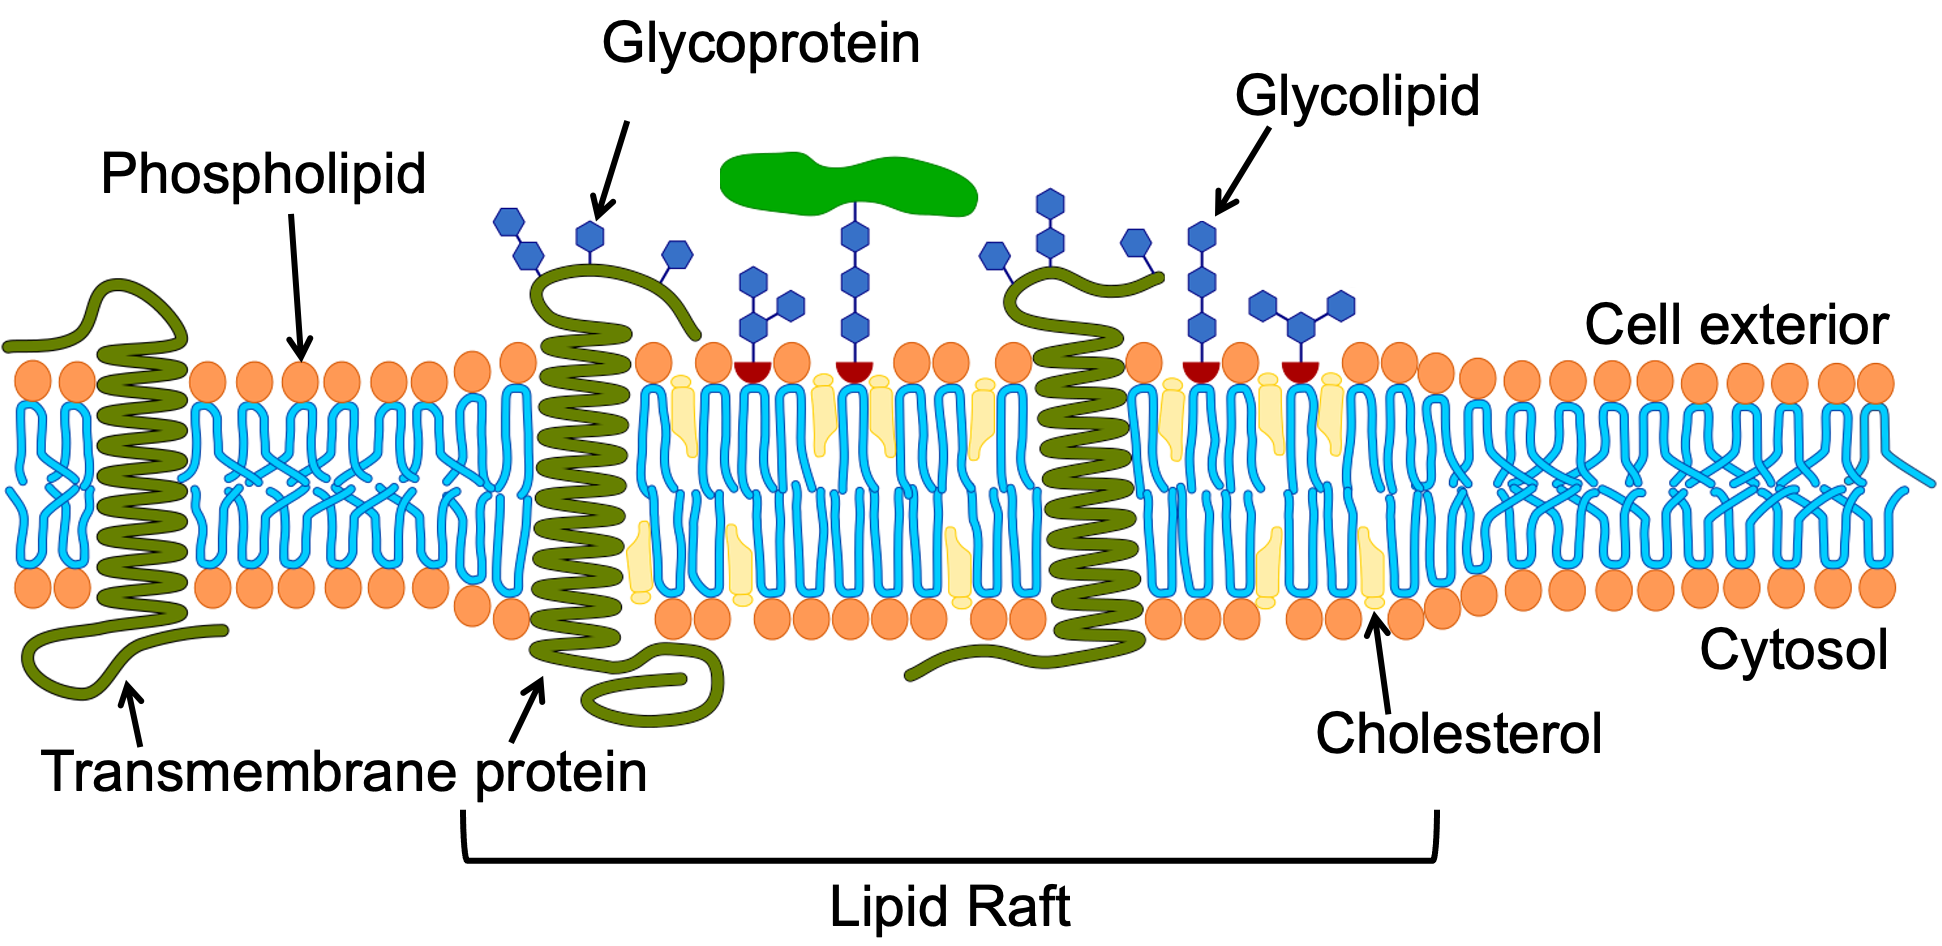 Depiction of the organization of a lipid raft